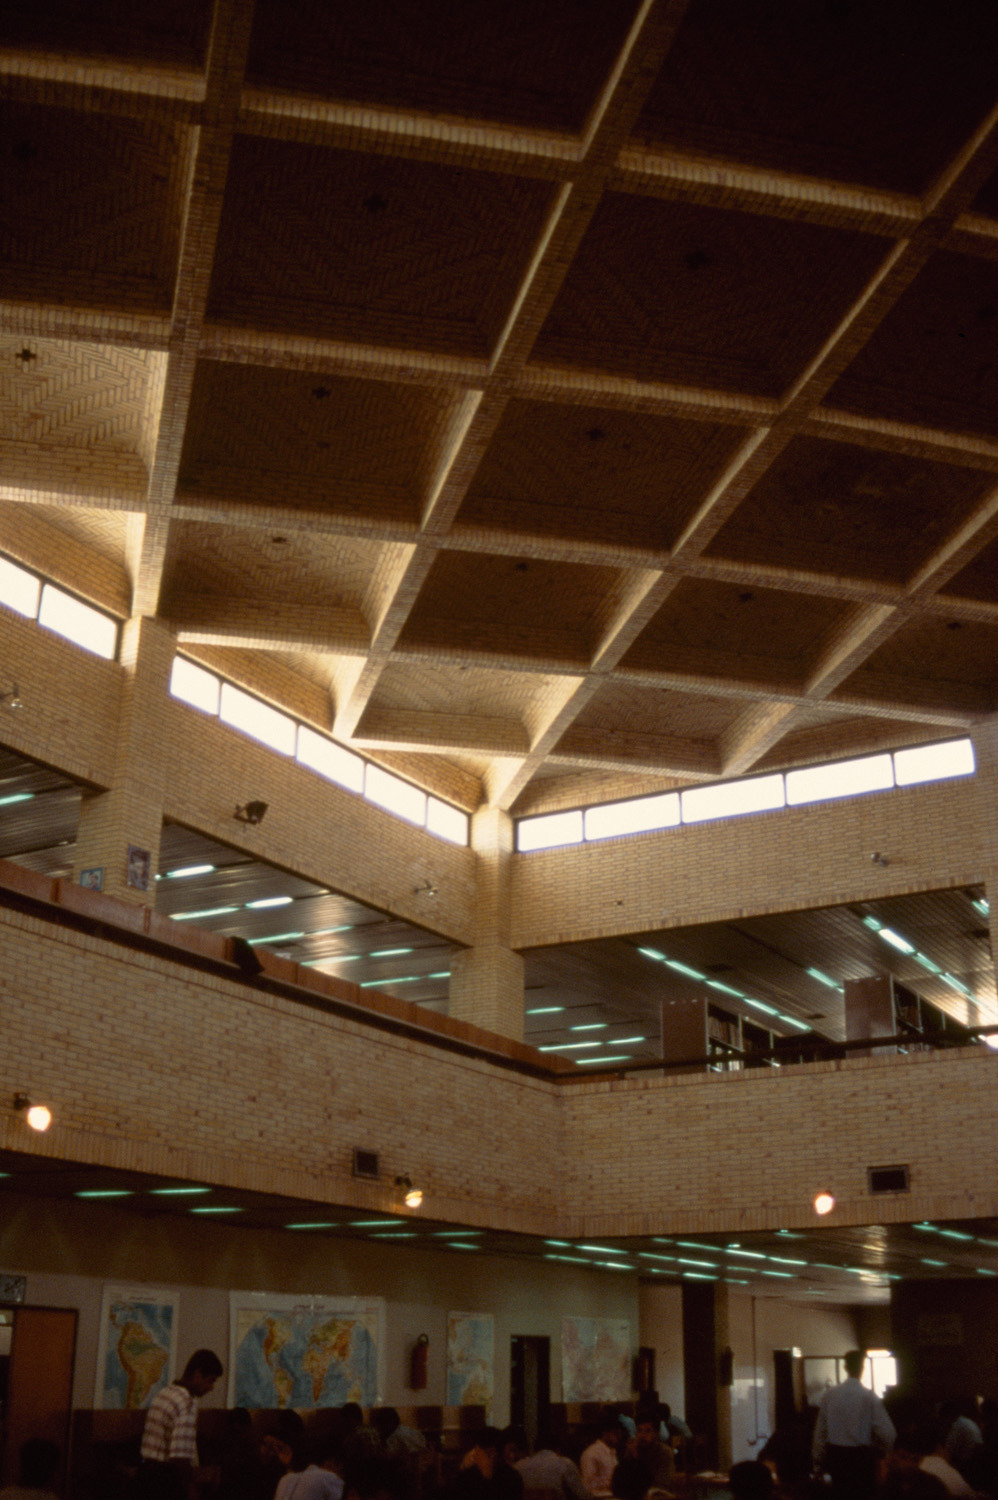 sosbrutalism: To deal with the Iranian desert heat, this university took cues from